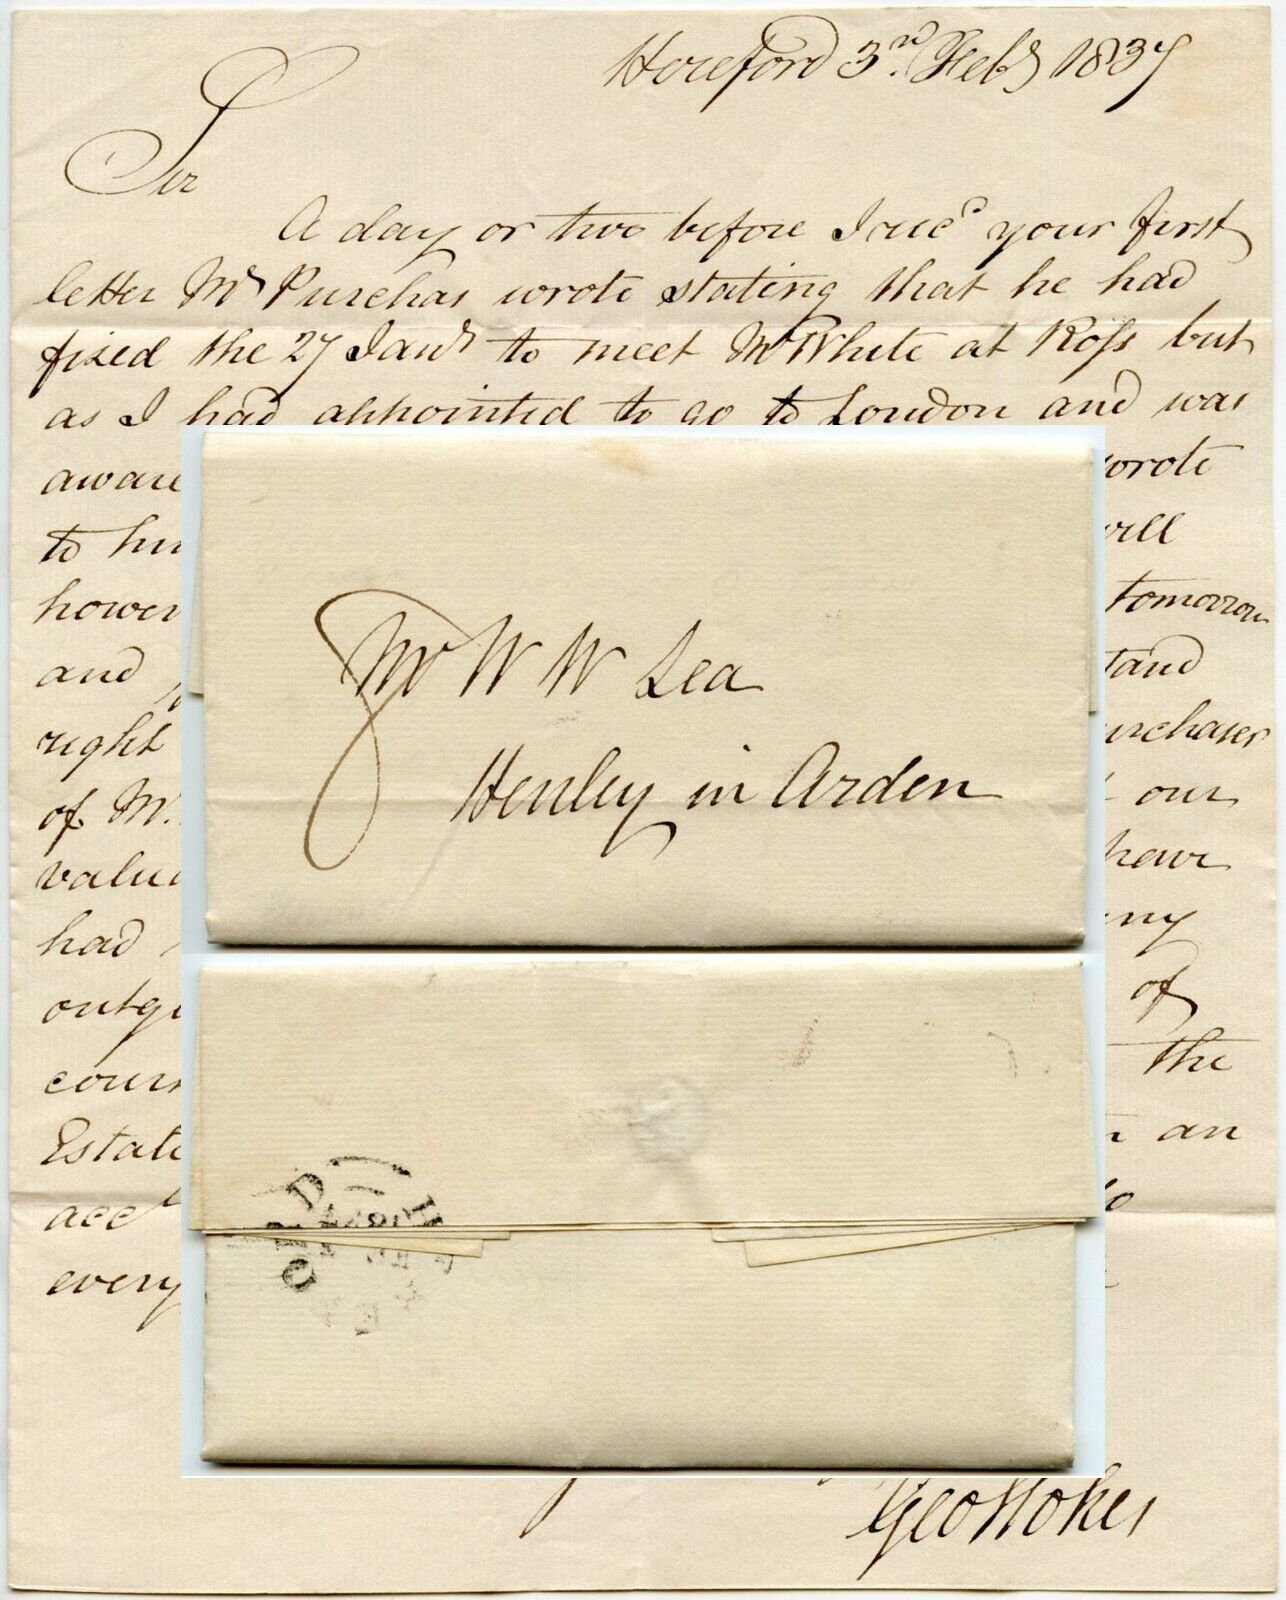 1837 LETTER HEREFORD to HENLEY SIGNED GEORGE STOKES re JOHN PURCHAS + DEWDALES